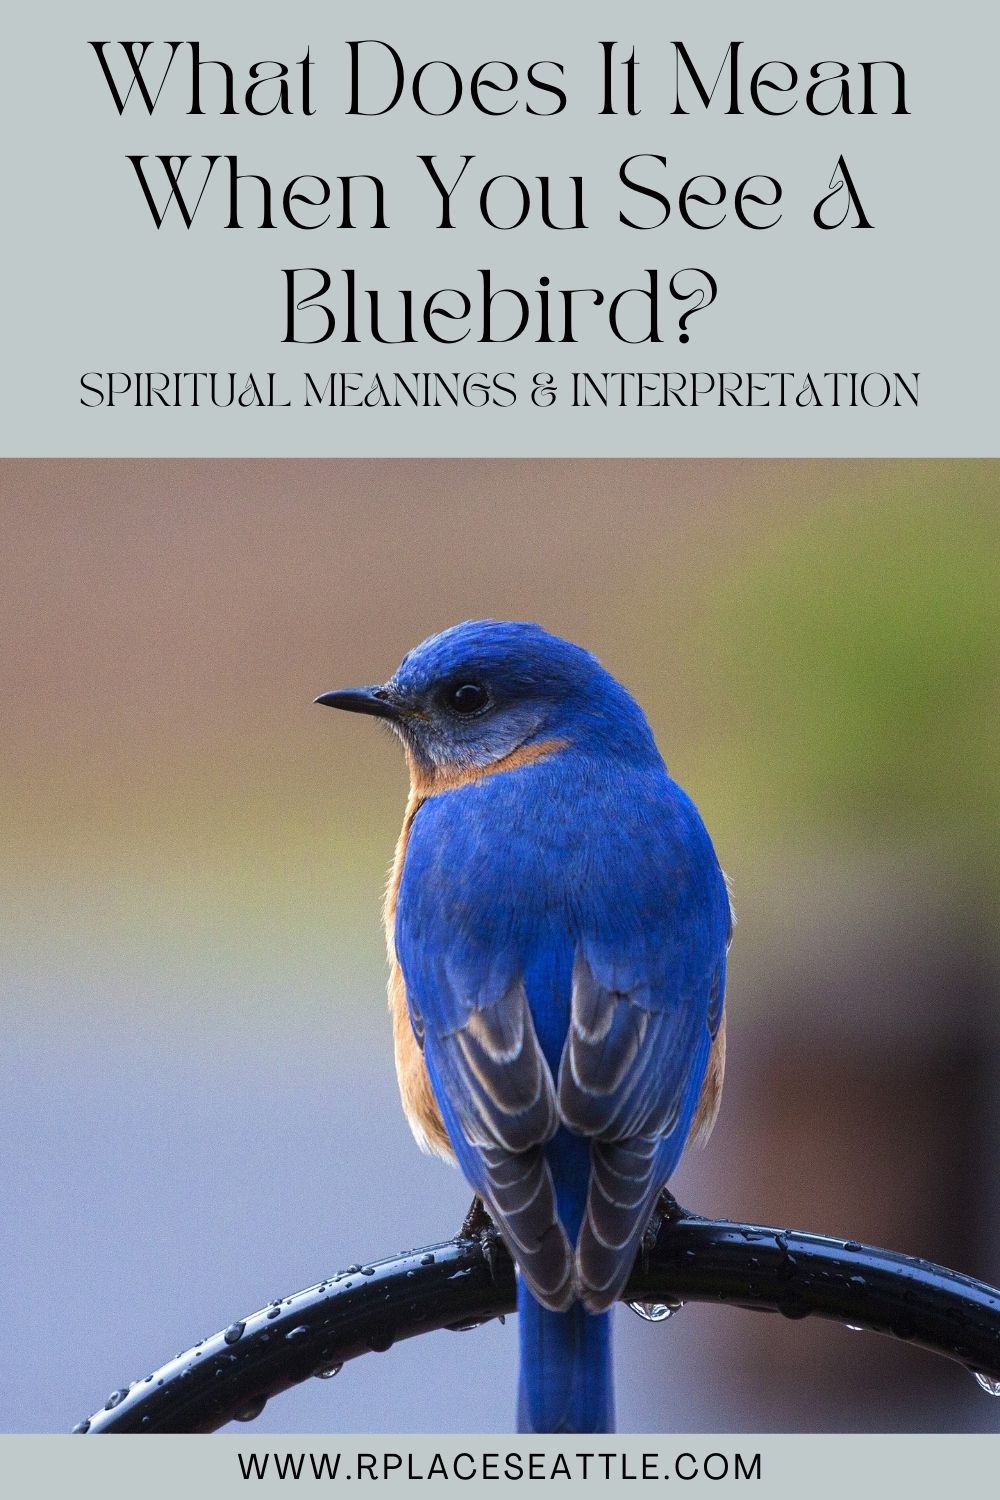 What Does It Mean When You See A Bluebird (Spiritual Meanings & Interpretation)